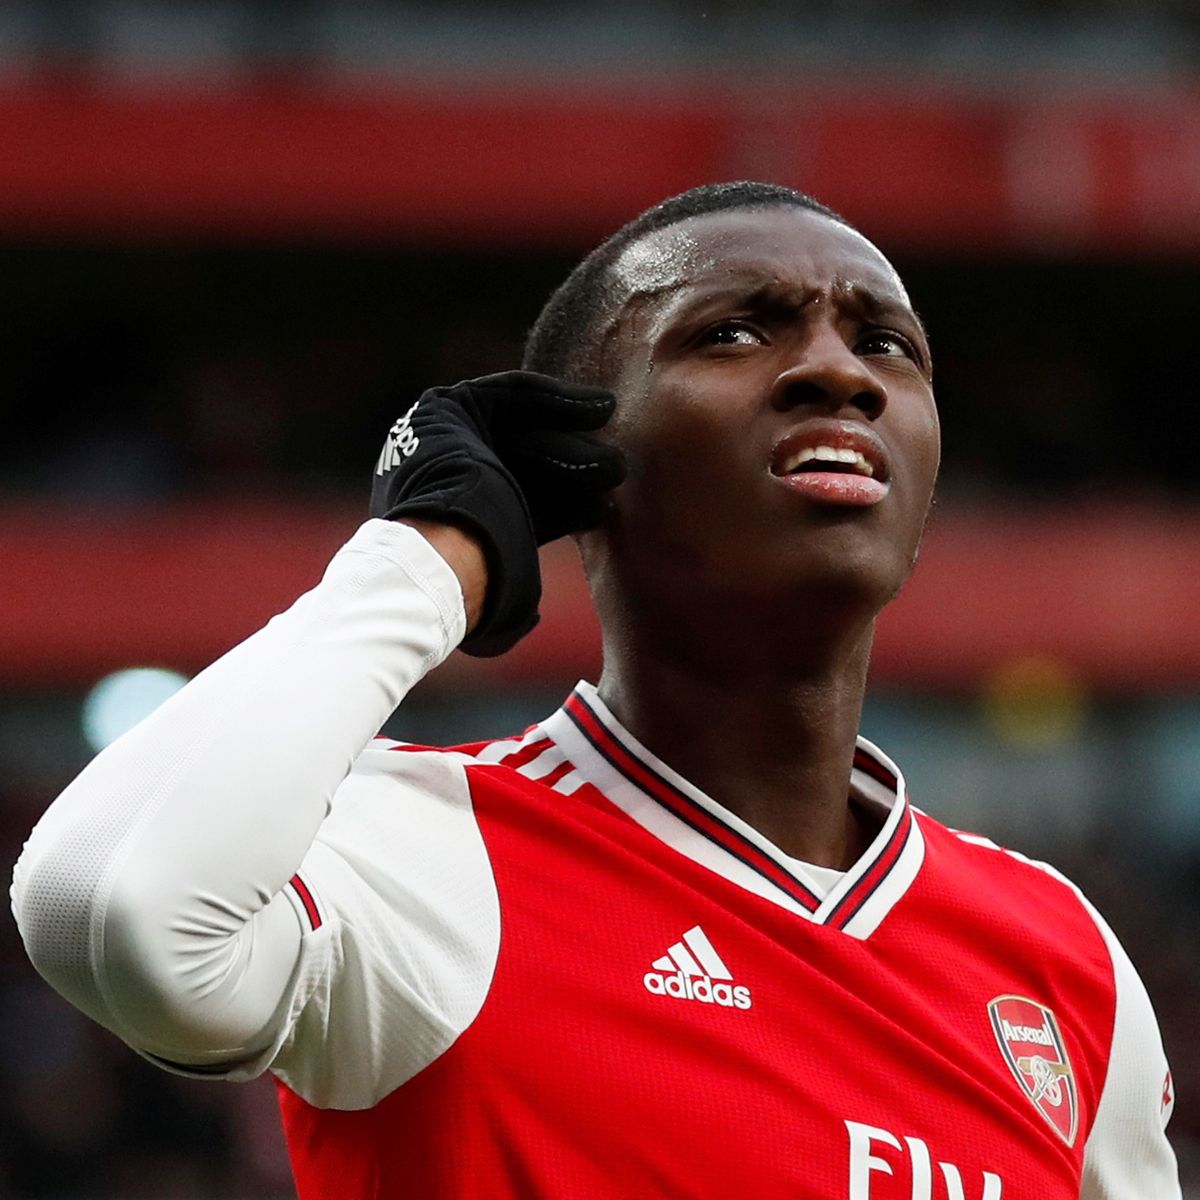 Eddie Nketiah got recalled from loan at Leeds because of a lack of gametime, and Mikel wanted to keep him at the club. Clearly having impressed Arteta this season, Eddie has worked his way into our starting XI, and performed really well. Should definitely be kept at the club.